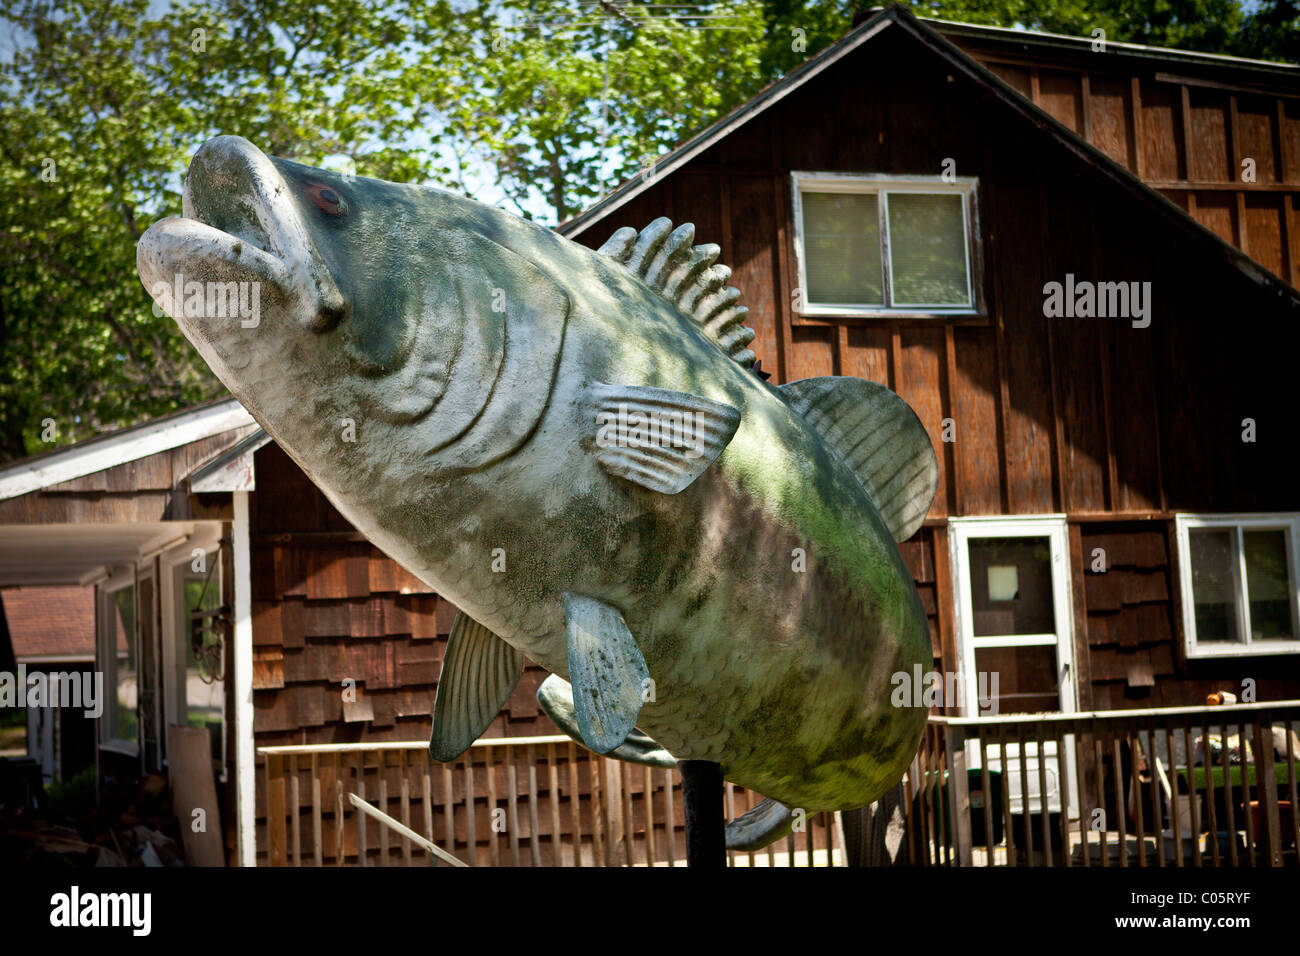 Giant bass statue in the Northwoods town of Manitowish Waters, Wisconsin. Stock Photo